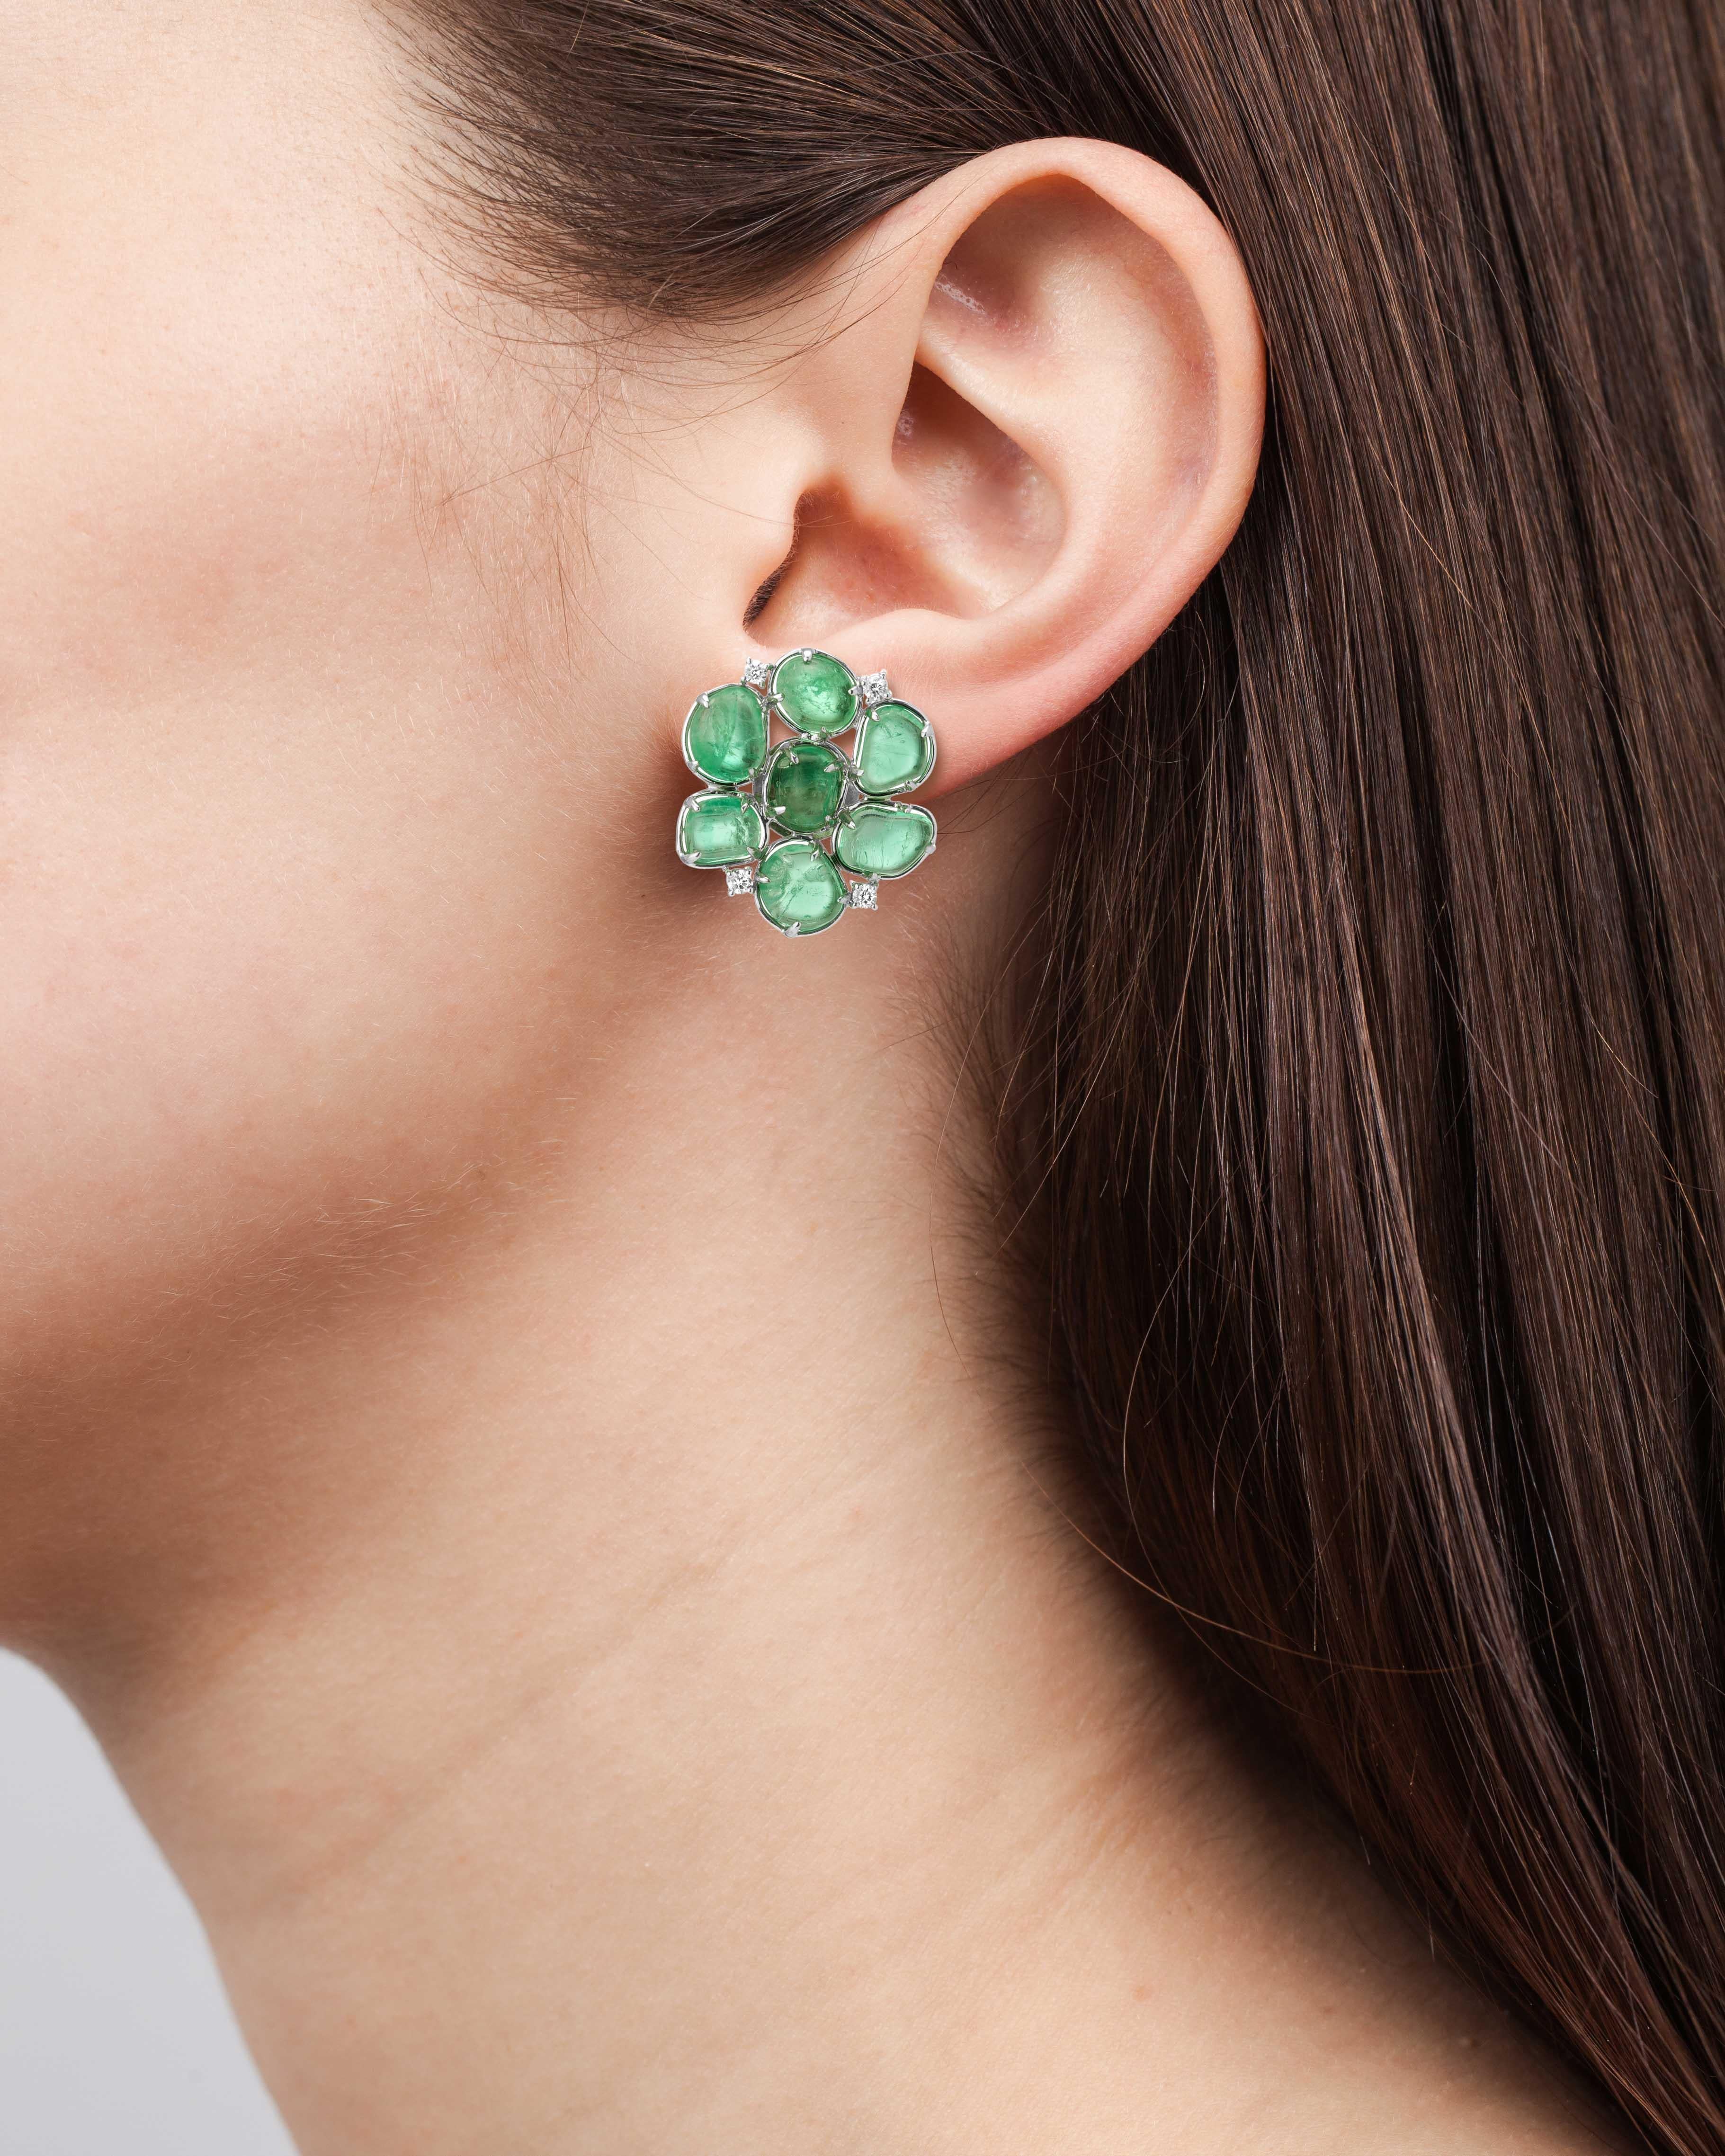 Flower Motif emerald studs set with 18 Karat white gold and Muzo emerlds of 29.58 carats and round brilliant diamonds as accents of 0.35 carats.

Muzo Emerald Colombia Heritage Royal Orb Earrings set with 29.58 carats Emerald.

One of 3 artifacts